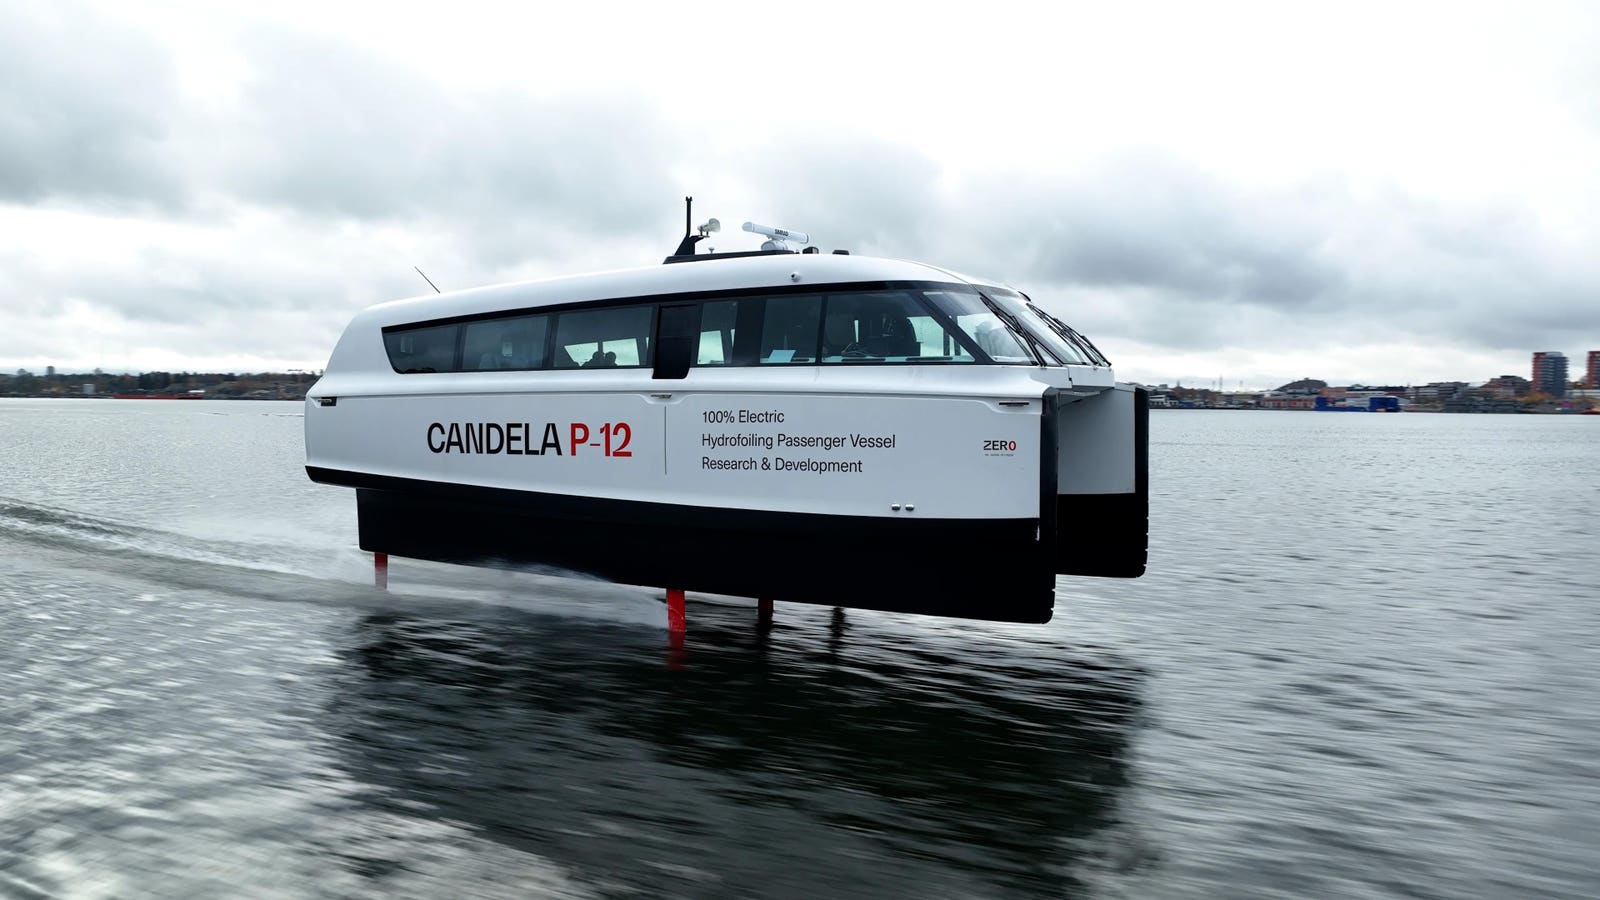 Candela’s All-Electric-Powered Hydrofoiling Passenger Ferry Poised To Transform Global Ferry Transportation